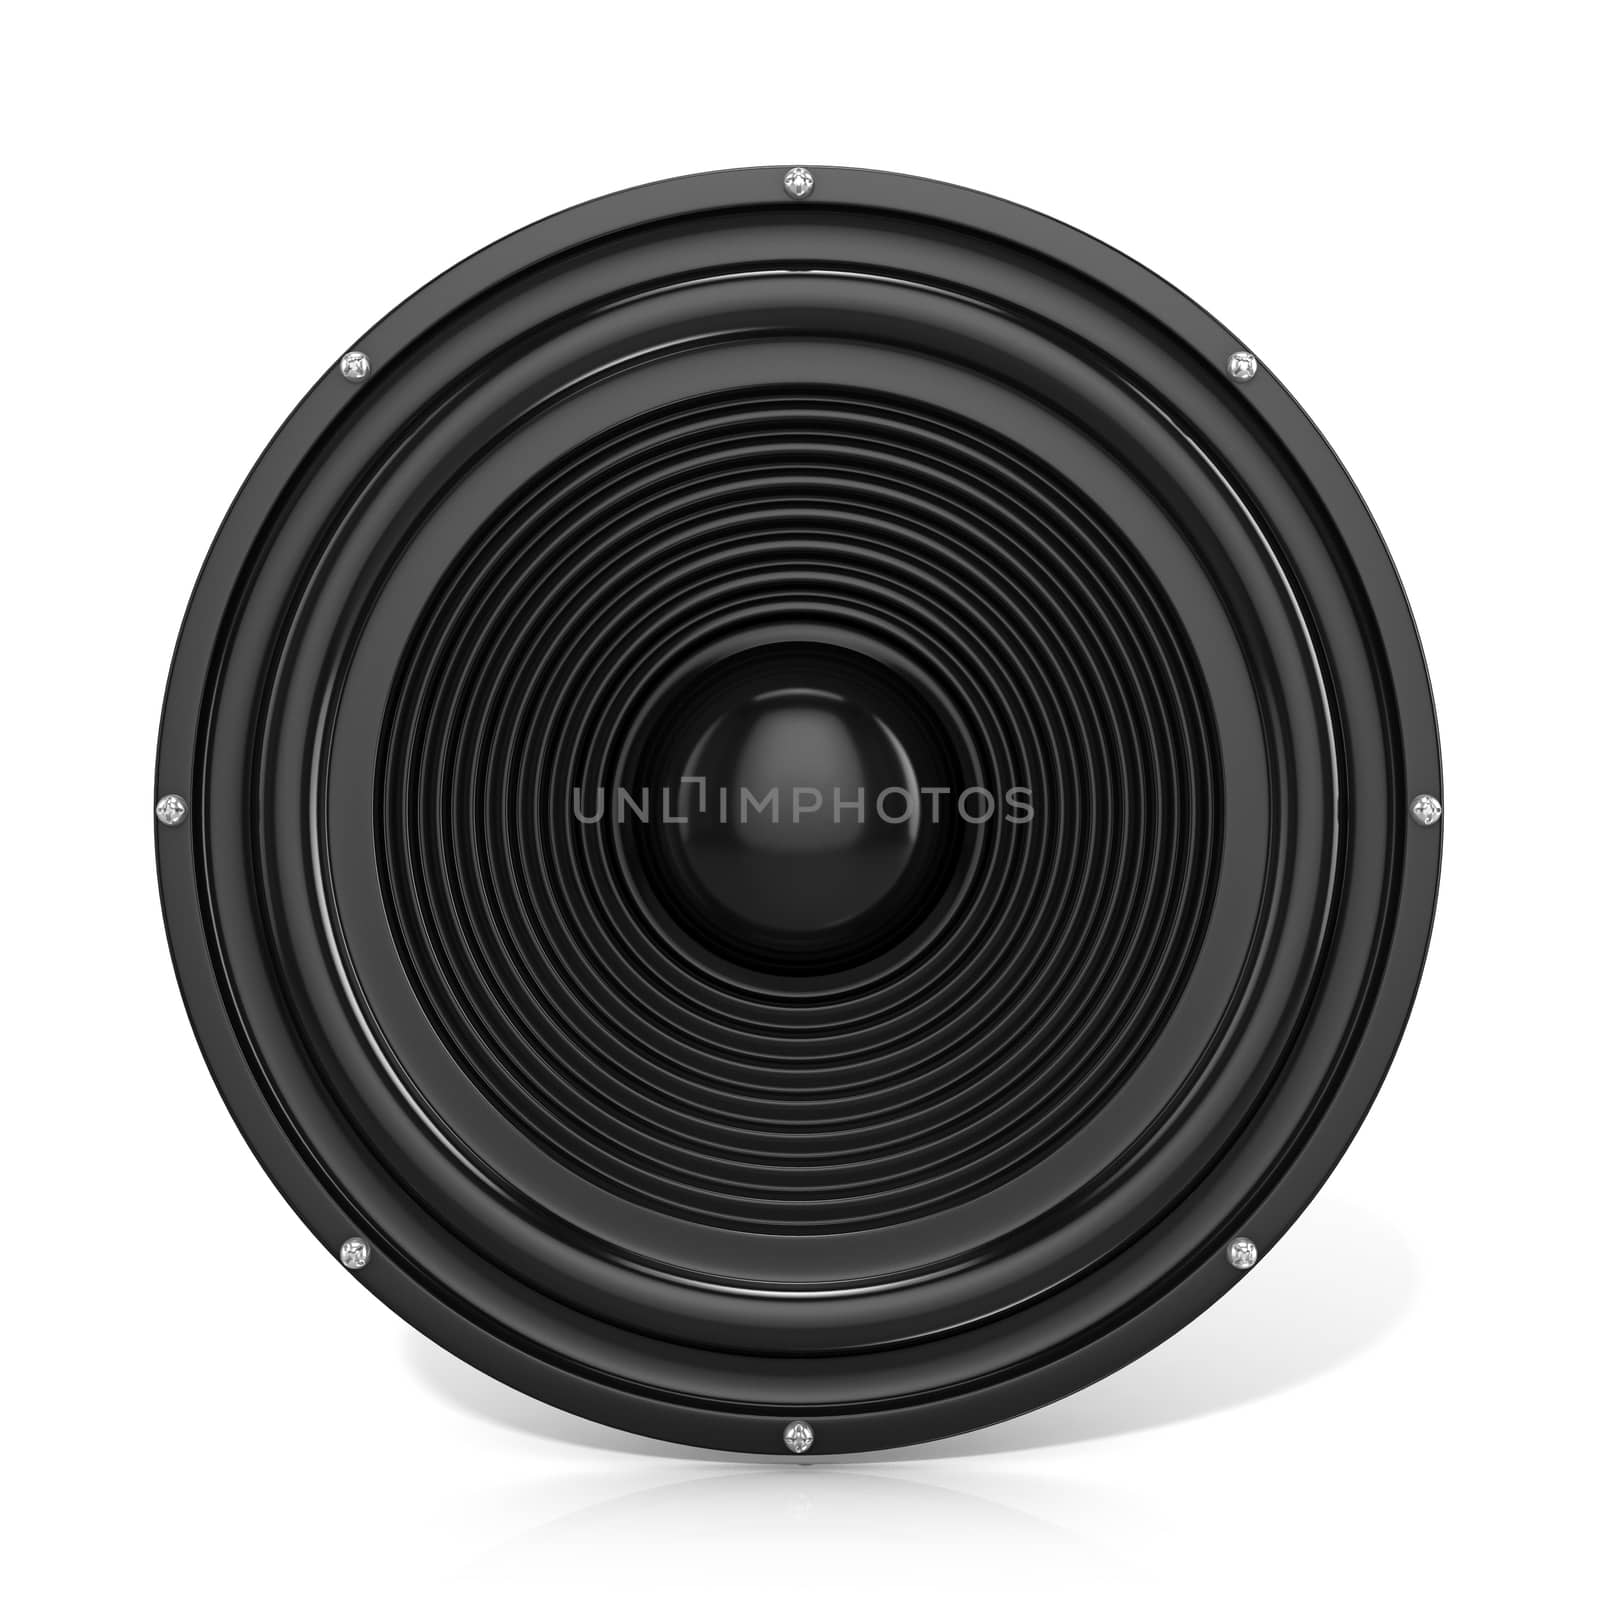 3D render illustration of loudspeaker. Isolated on white background. Front view.